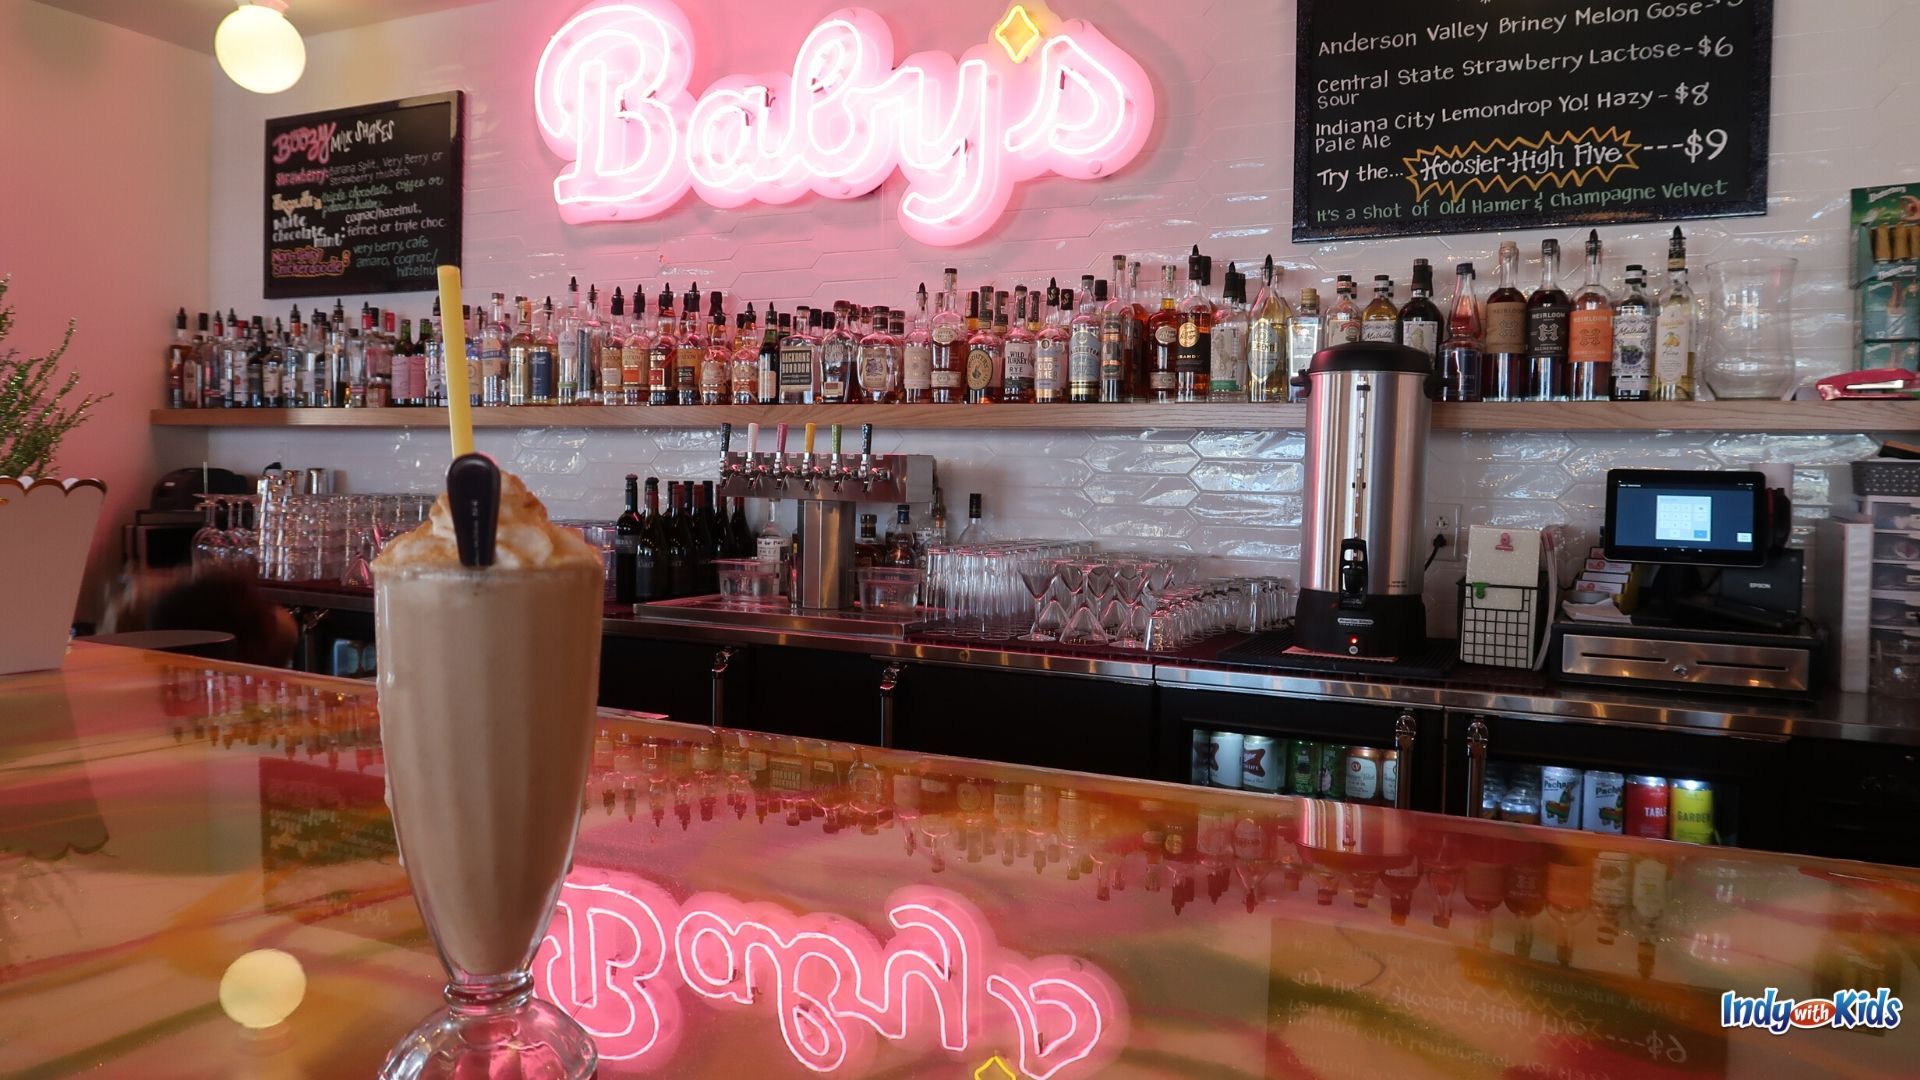 The Best Burger in Indianapolis: A chocolate milkshake with a spoon and a straw sits on a bar top in front of a glowing pink neon sign reading "Baby's."